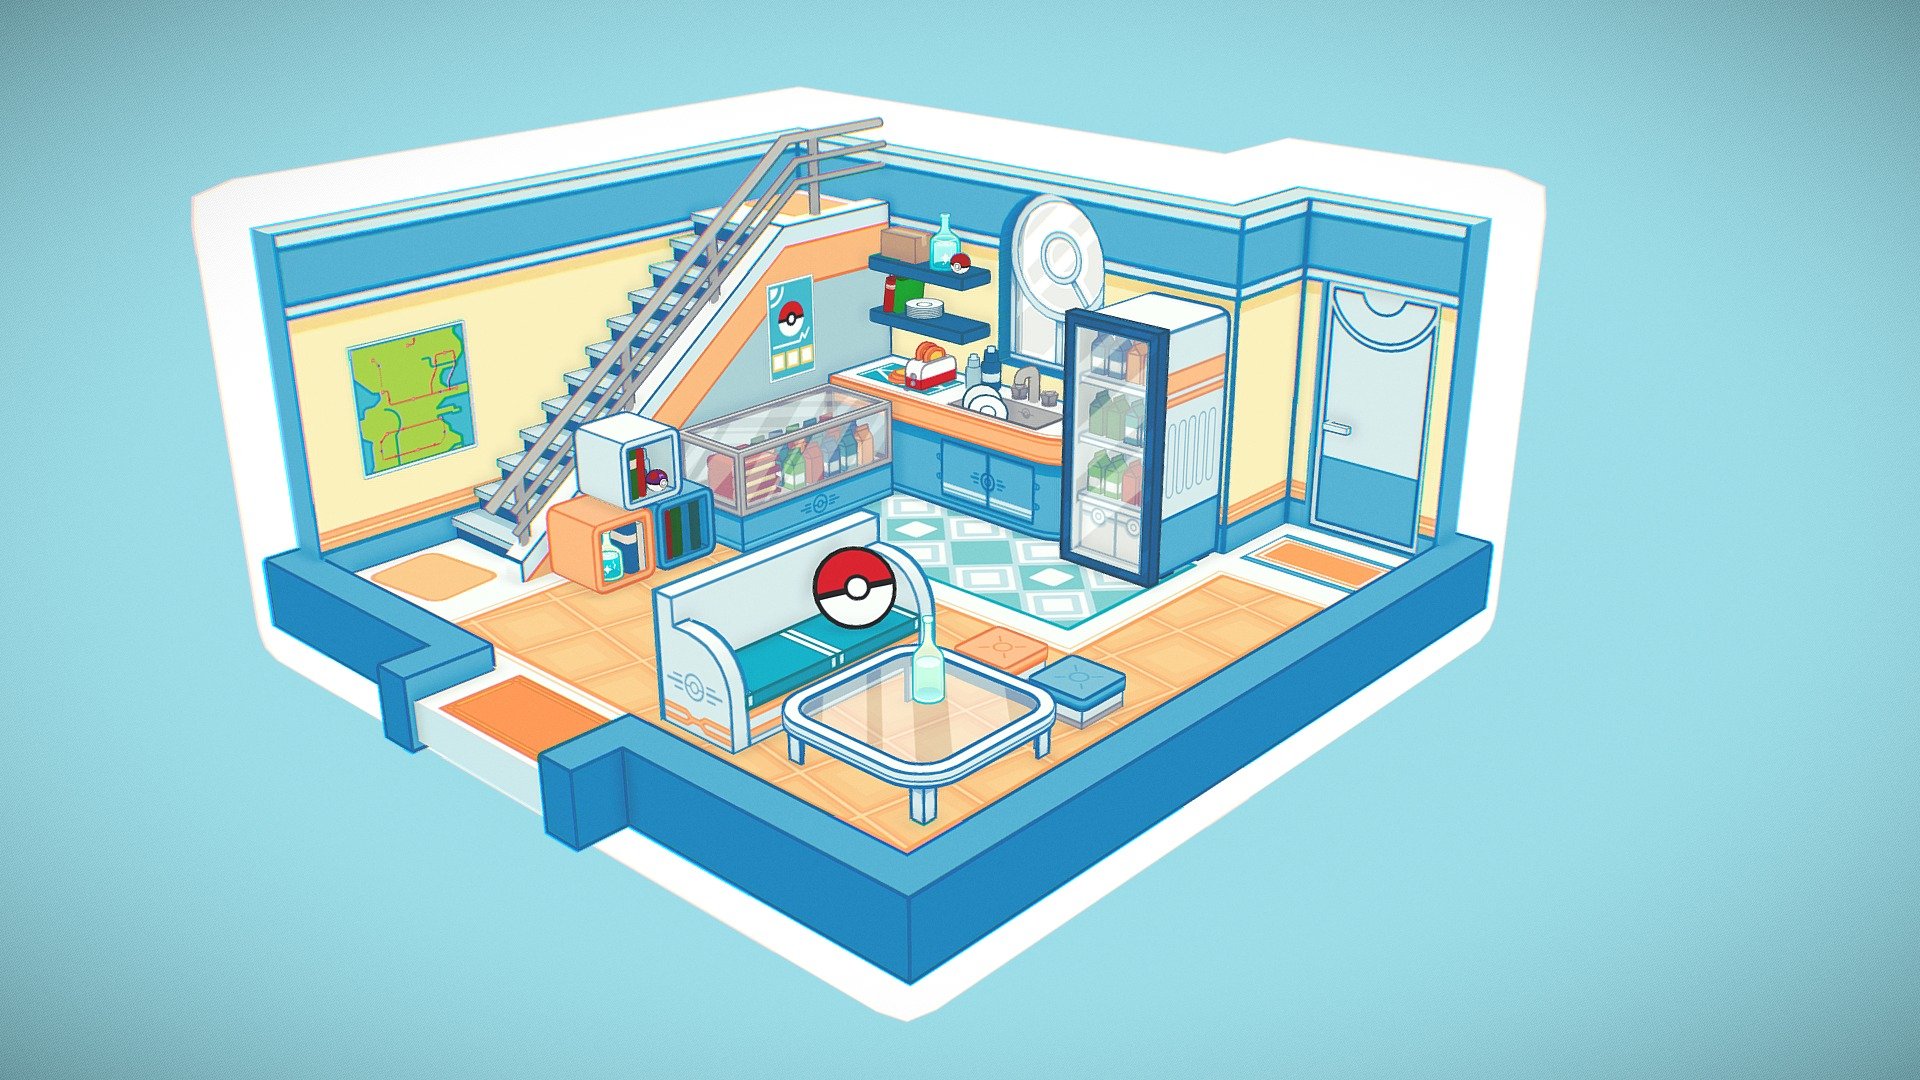 The new Pokemon games was a good opportunity for studies. I've try to imagine a room in a style between Animal Crossing and Pokemon. I hope you like it!

(Note: textures are ridiculously unoptimized, you can check if you want: it's a big mess) - Pokemon Kitchen - 3D model by Hellioze 3d model